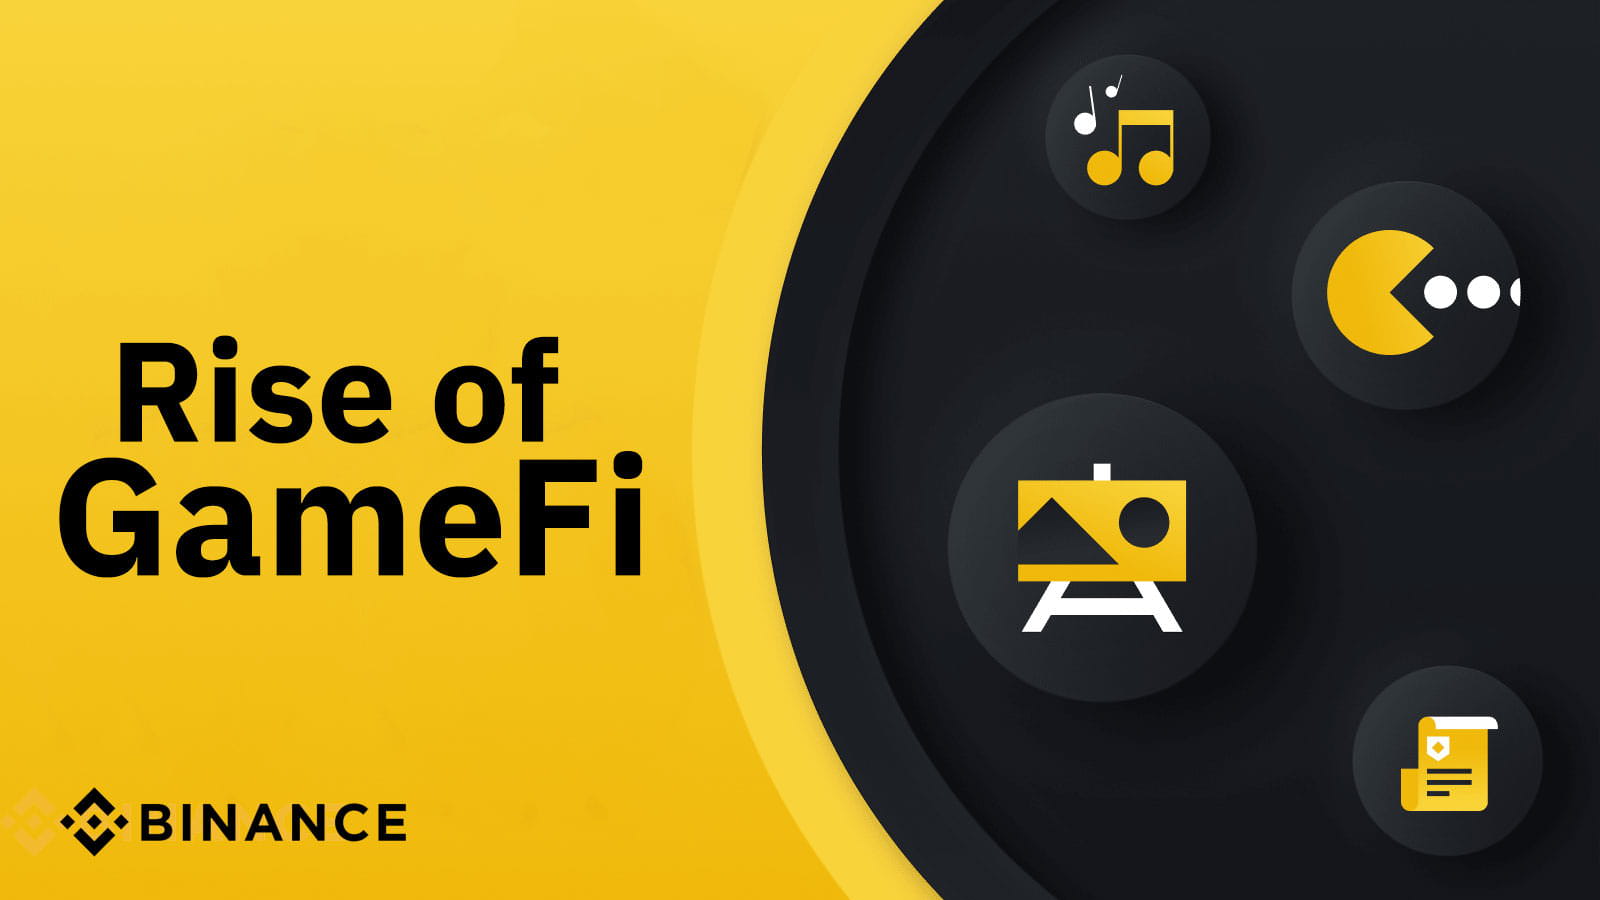 What is GameFi?